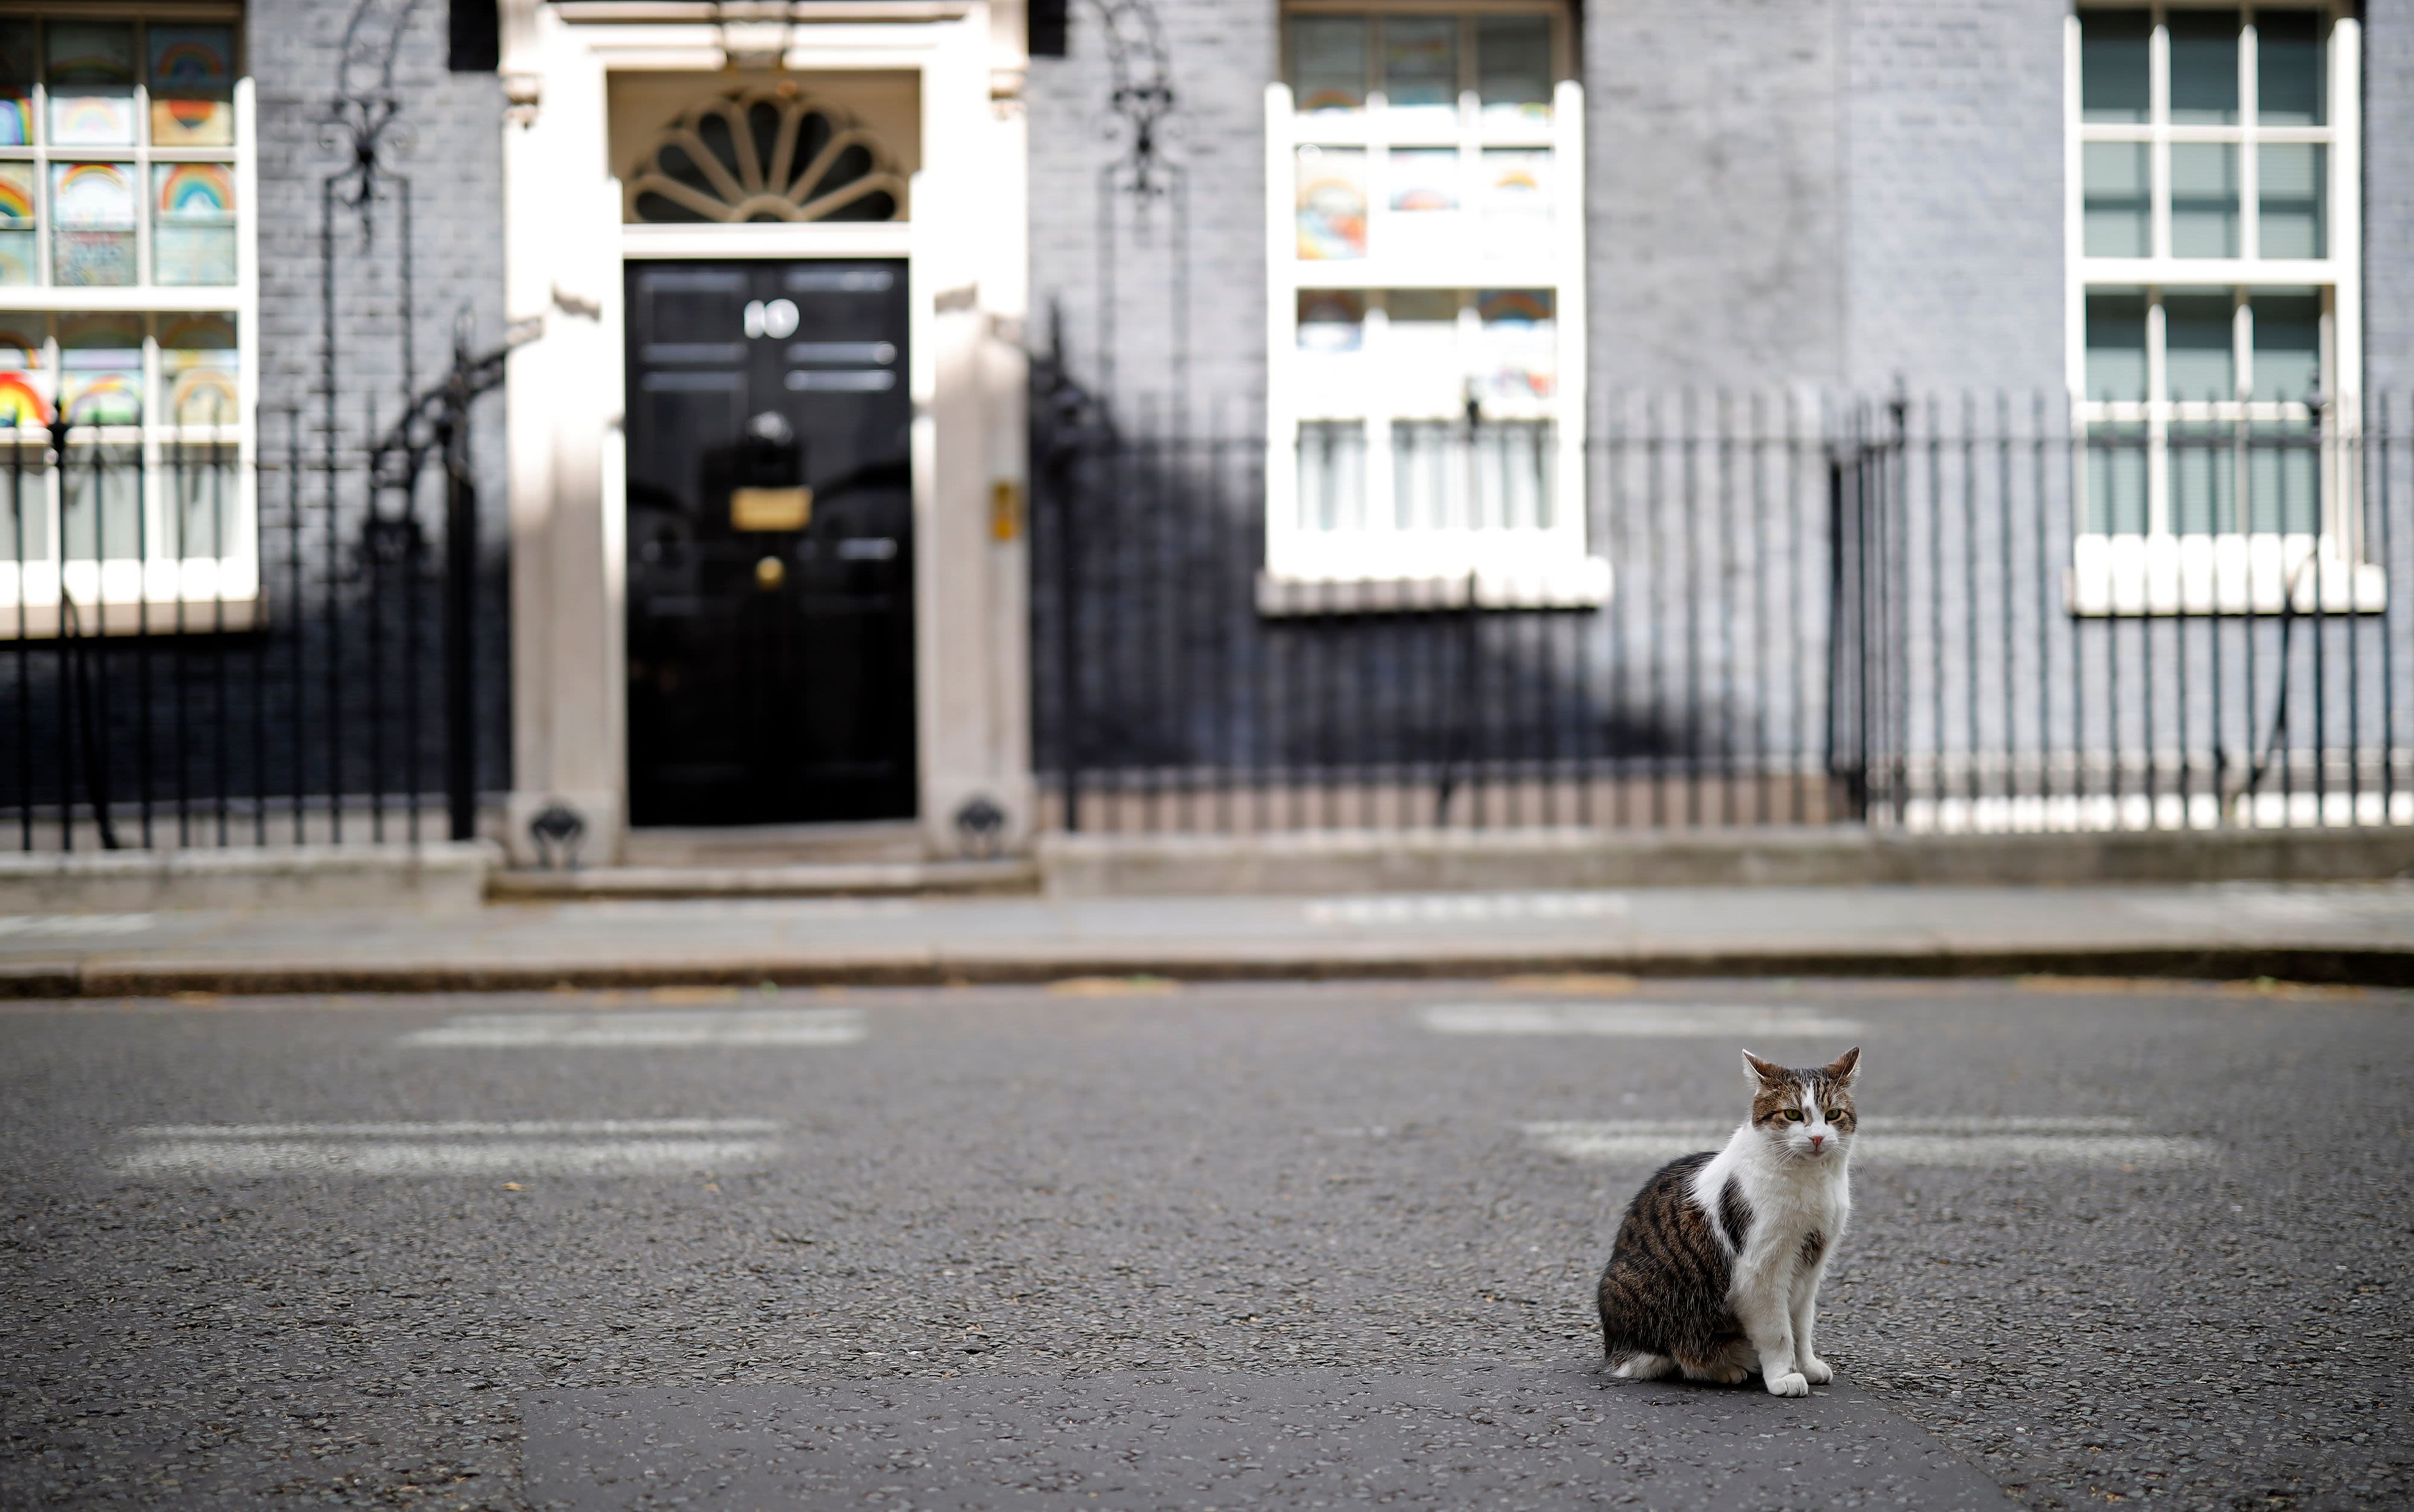 At 10 Downing Street, you'll find the prime minister of Britain and also Larry the cat, pictured here in 2020. Larry has resided at the famed address since February 2011.  Impervious to cabinet reshuffles and political upheavals, he holds the official title of "<a href="index.php?page=&url=https%3A%2F%2Fwww.gov.uk%2Fgovernment%2Fhistory%2F10-downing-street%23larry-chief-mouser" target="_blank" target="_blank">Chief Mouser to the Cabinet Office</a>" and is tasked with keeping rodents away.